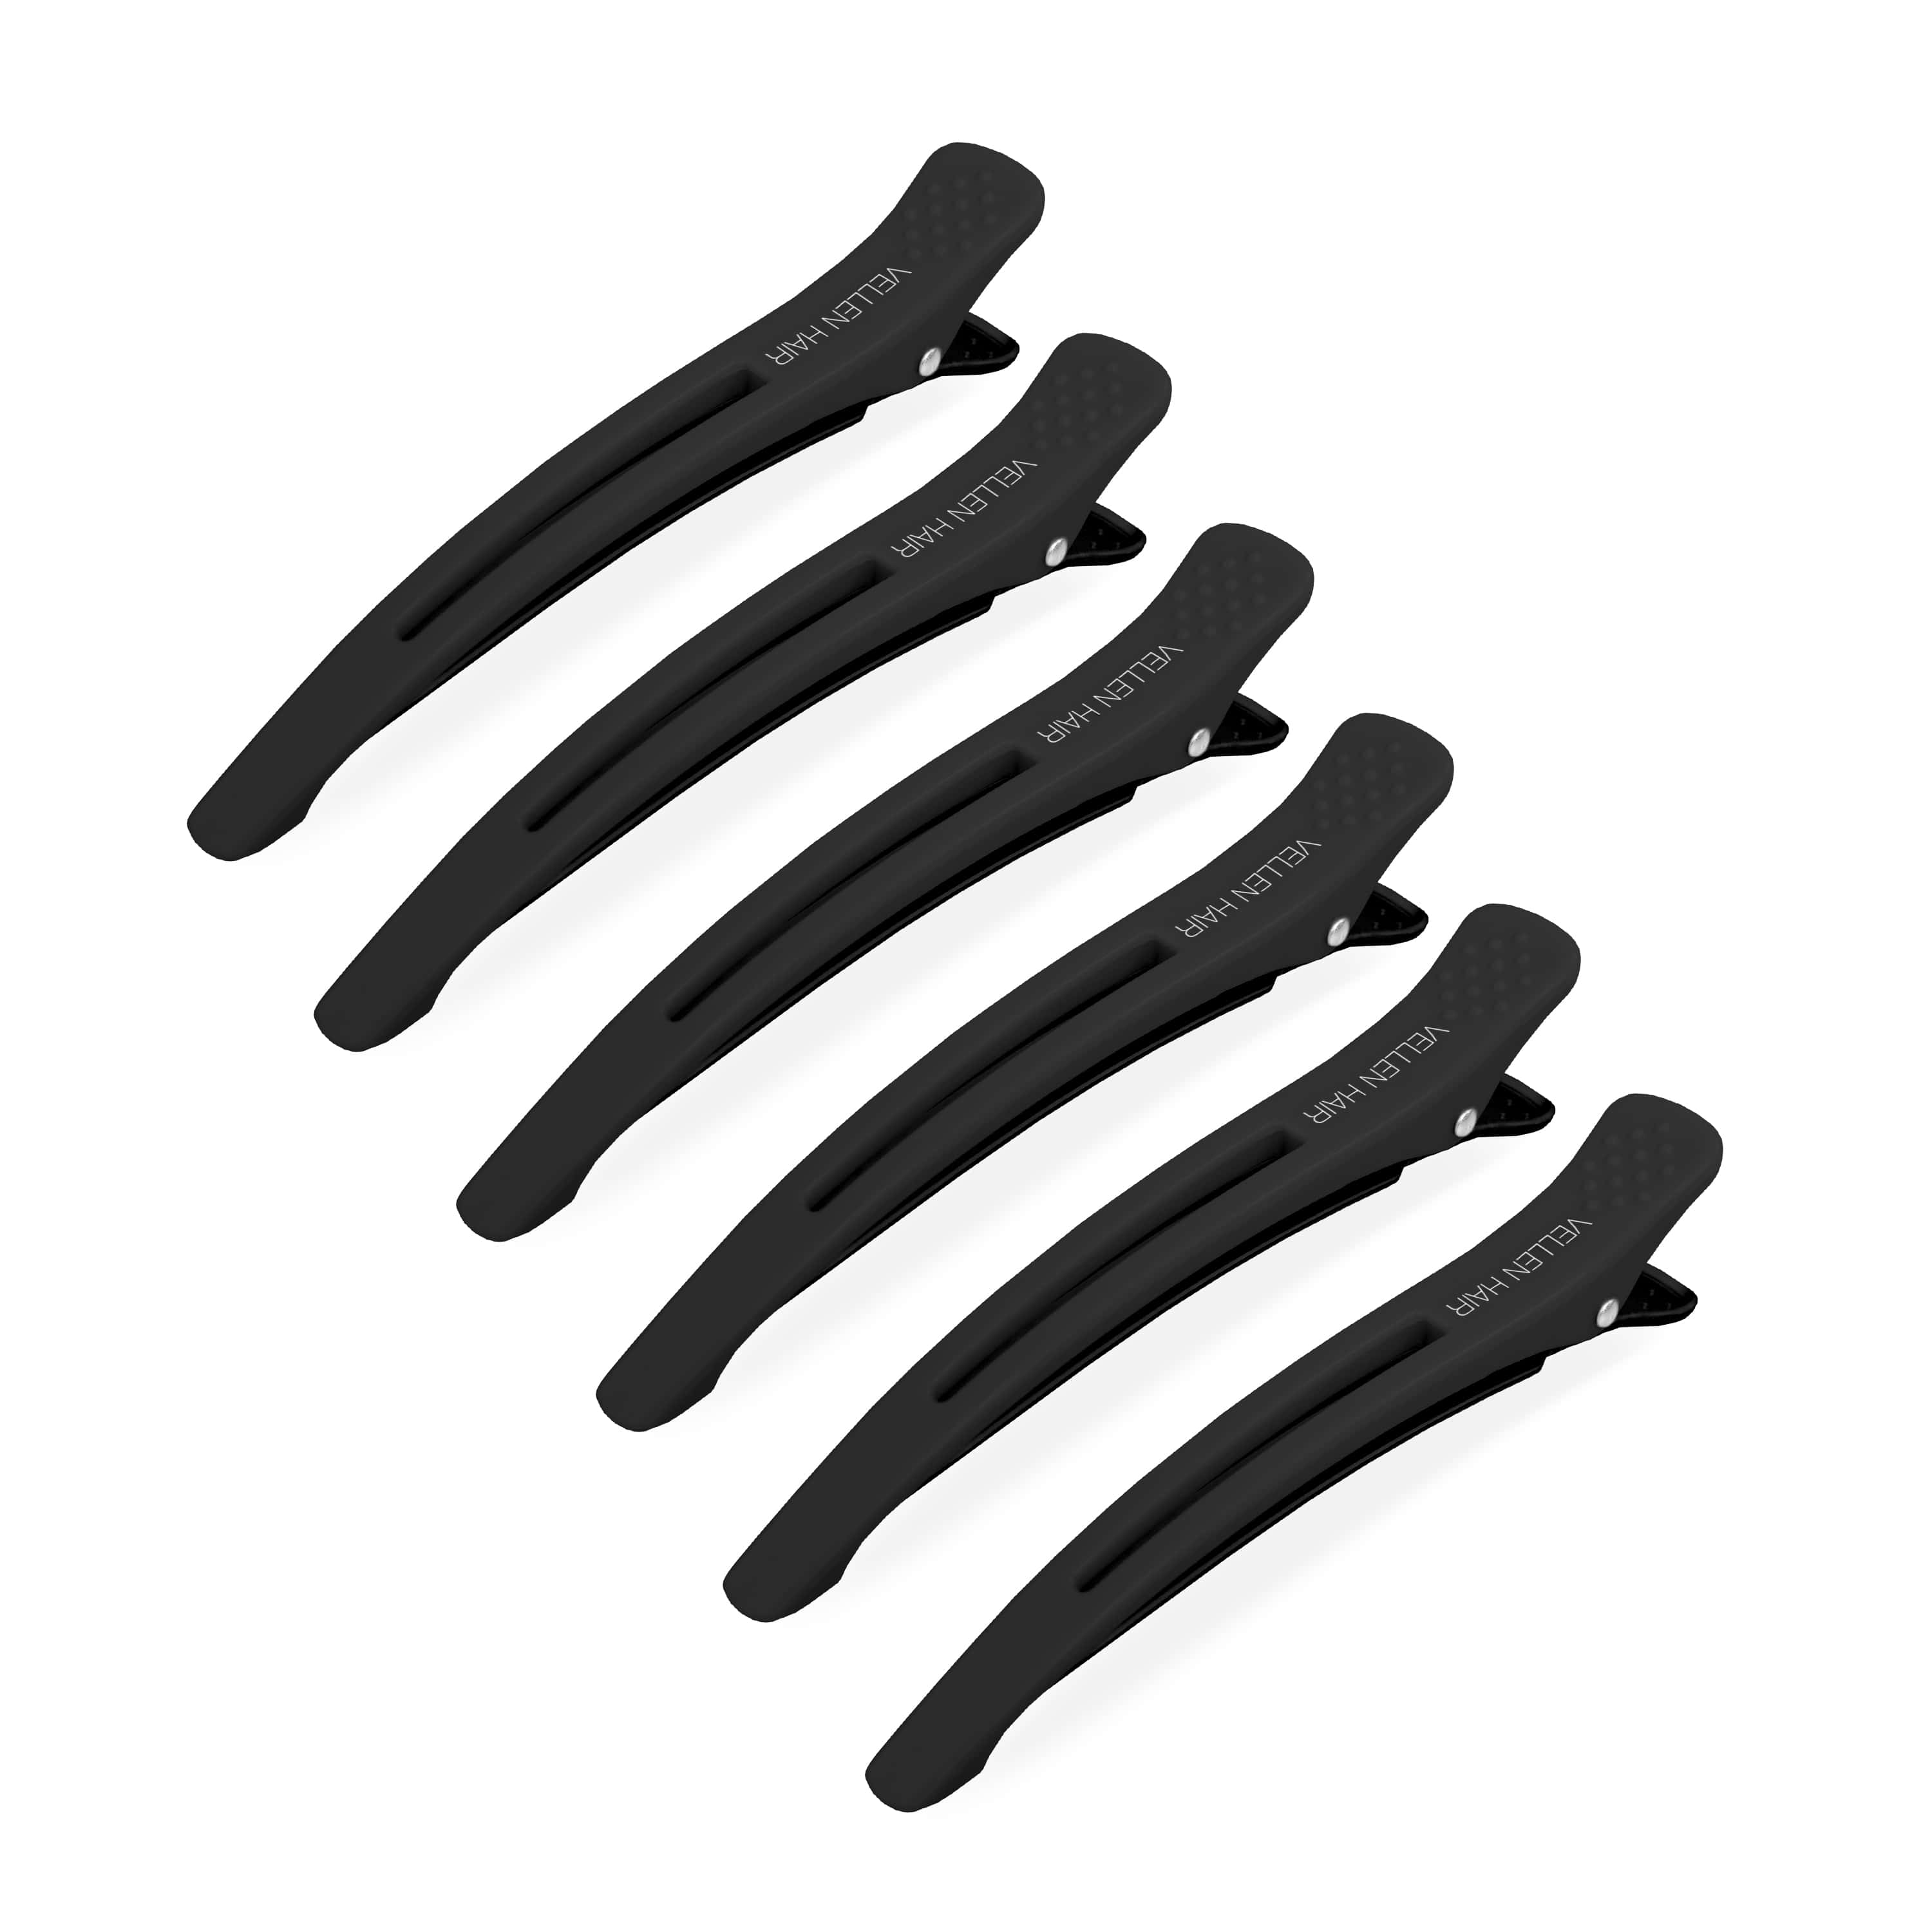 Sectioning Hair Clips - 6 Pack - Black